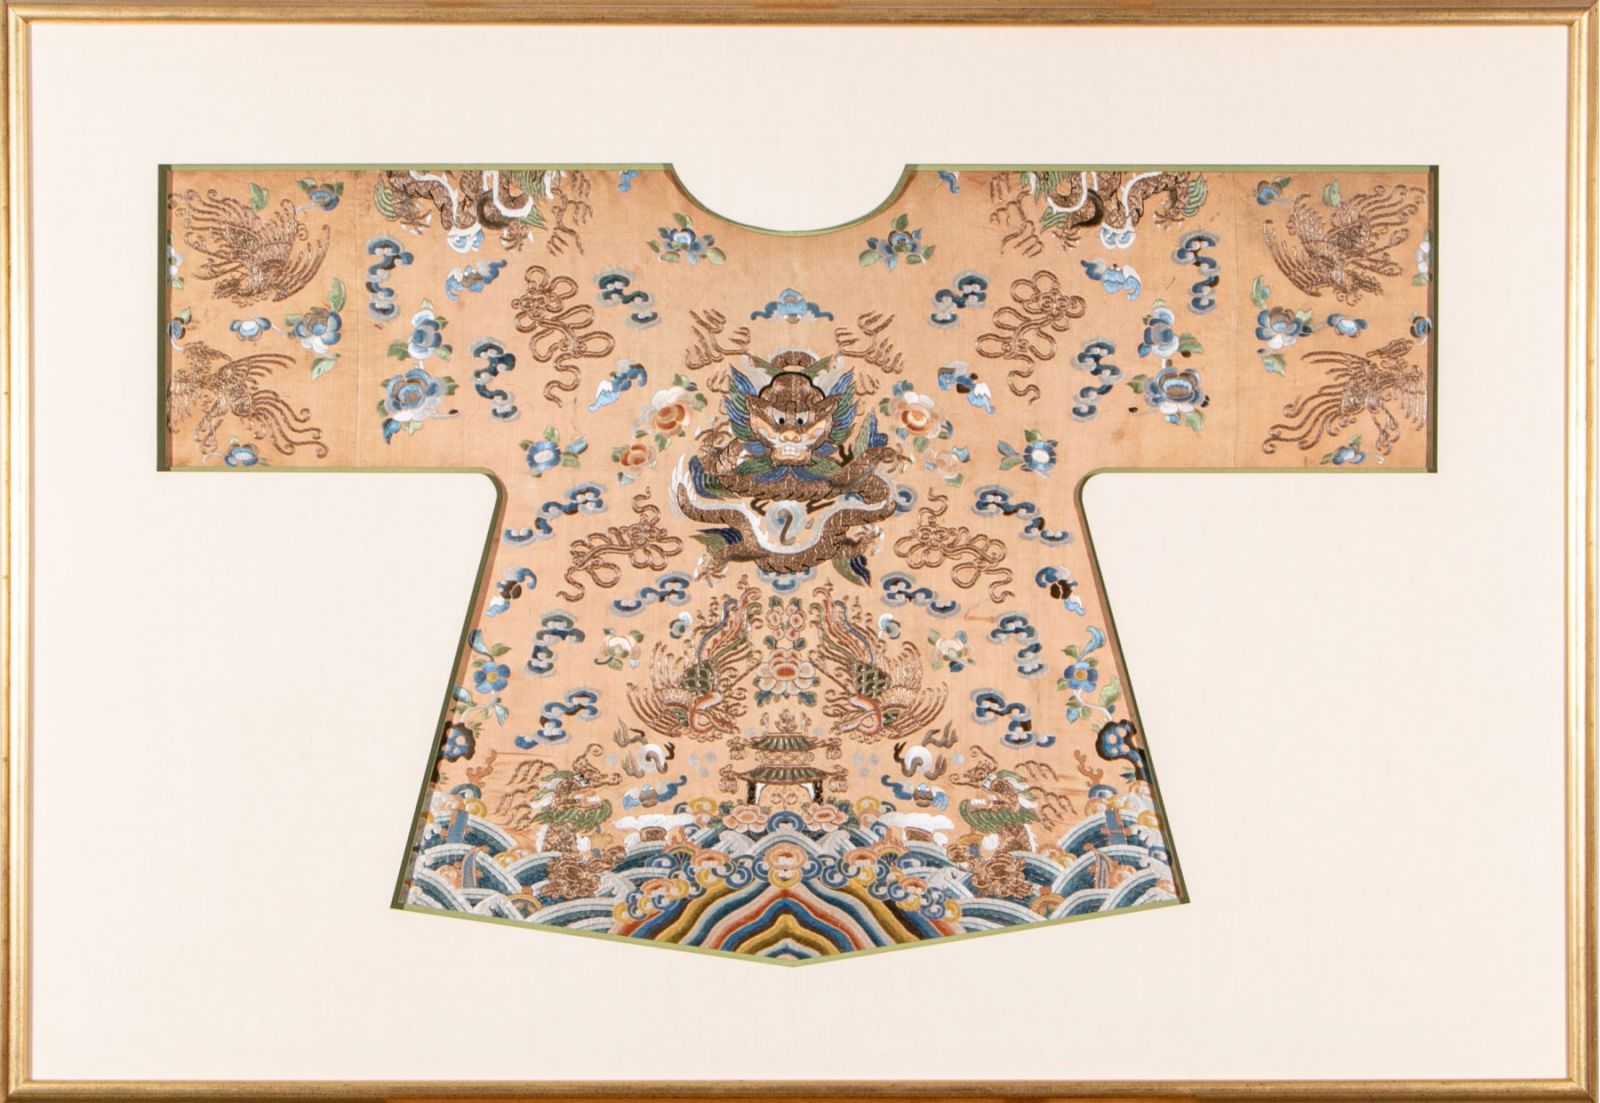 The Estate & Lifetime Collection of Barbara J. Paul: Chinese Late Qing Dynasty Imperial Female Child's Robe